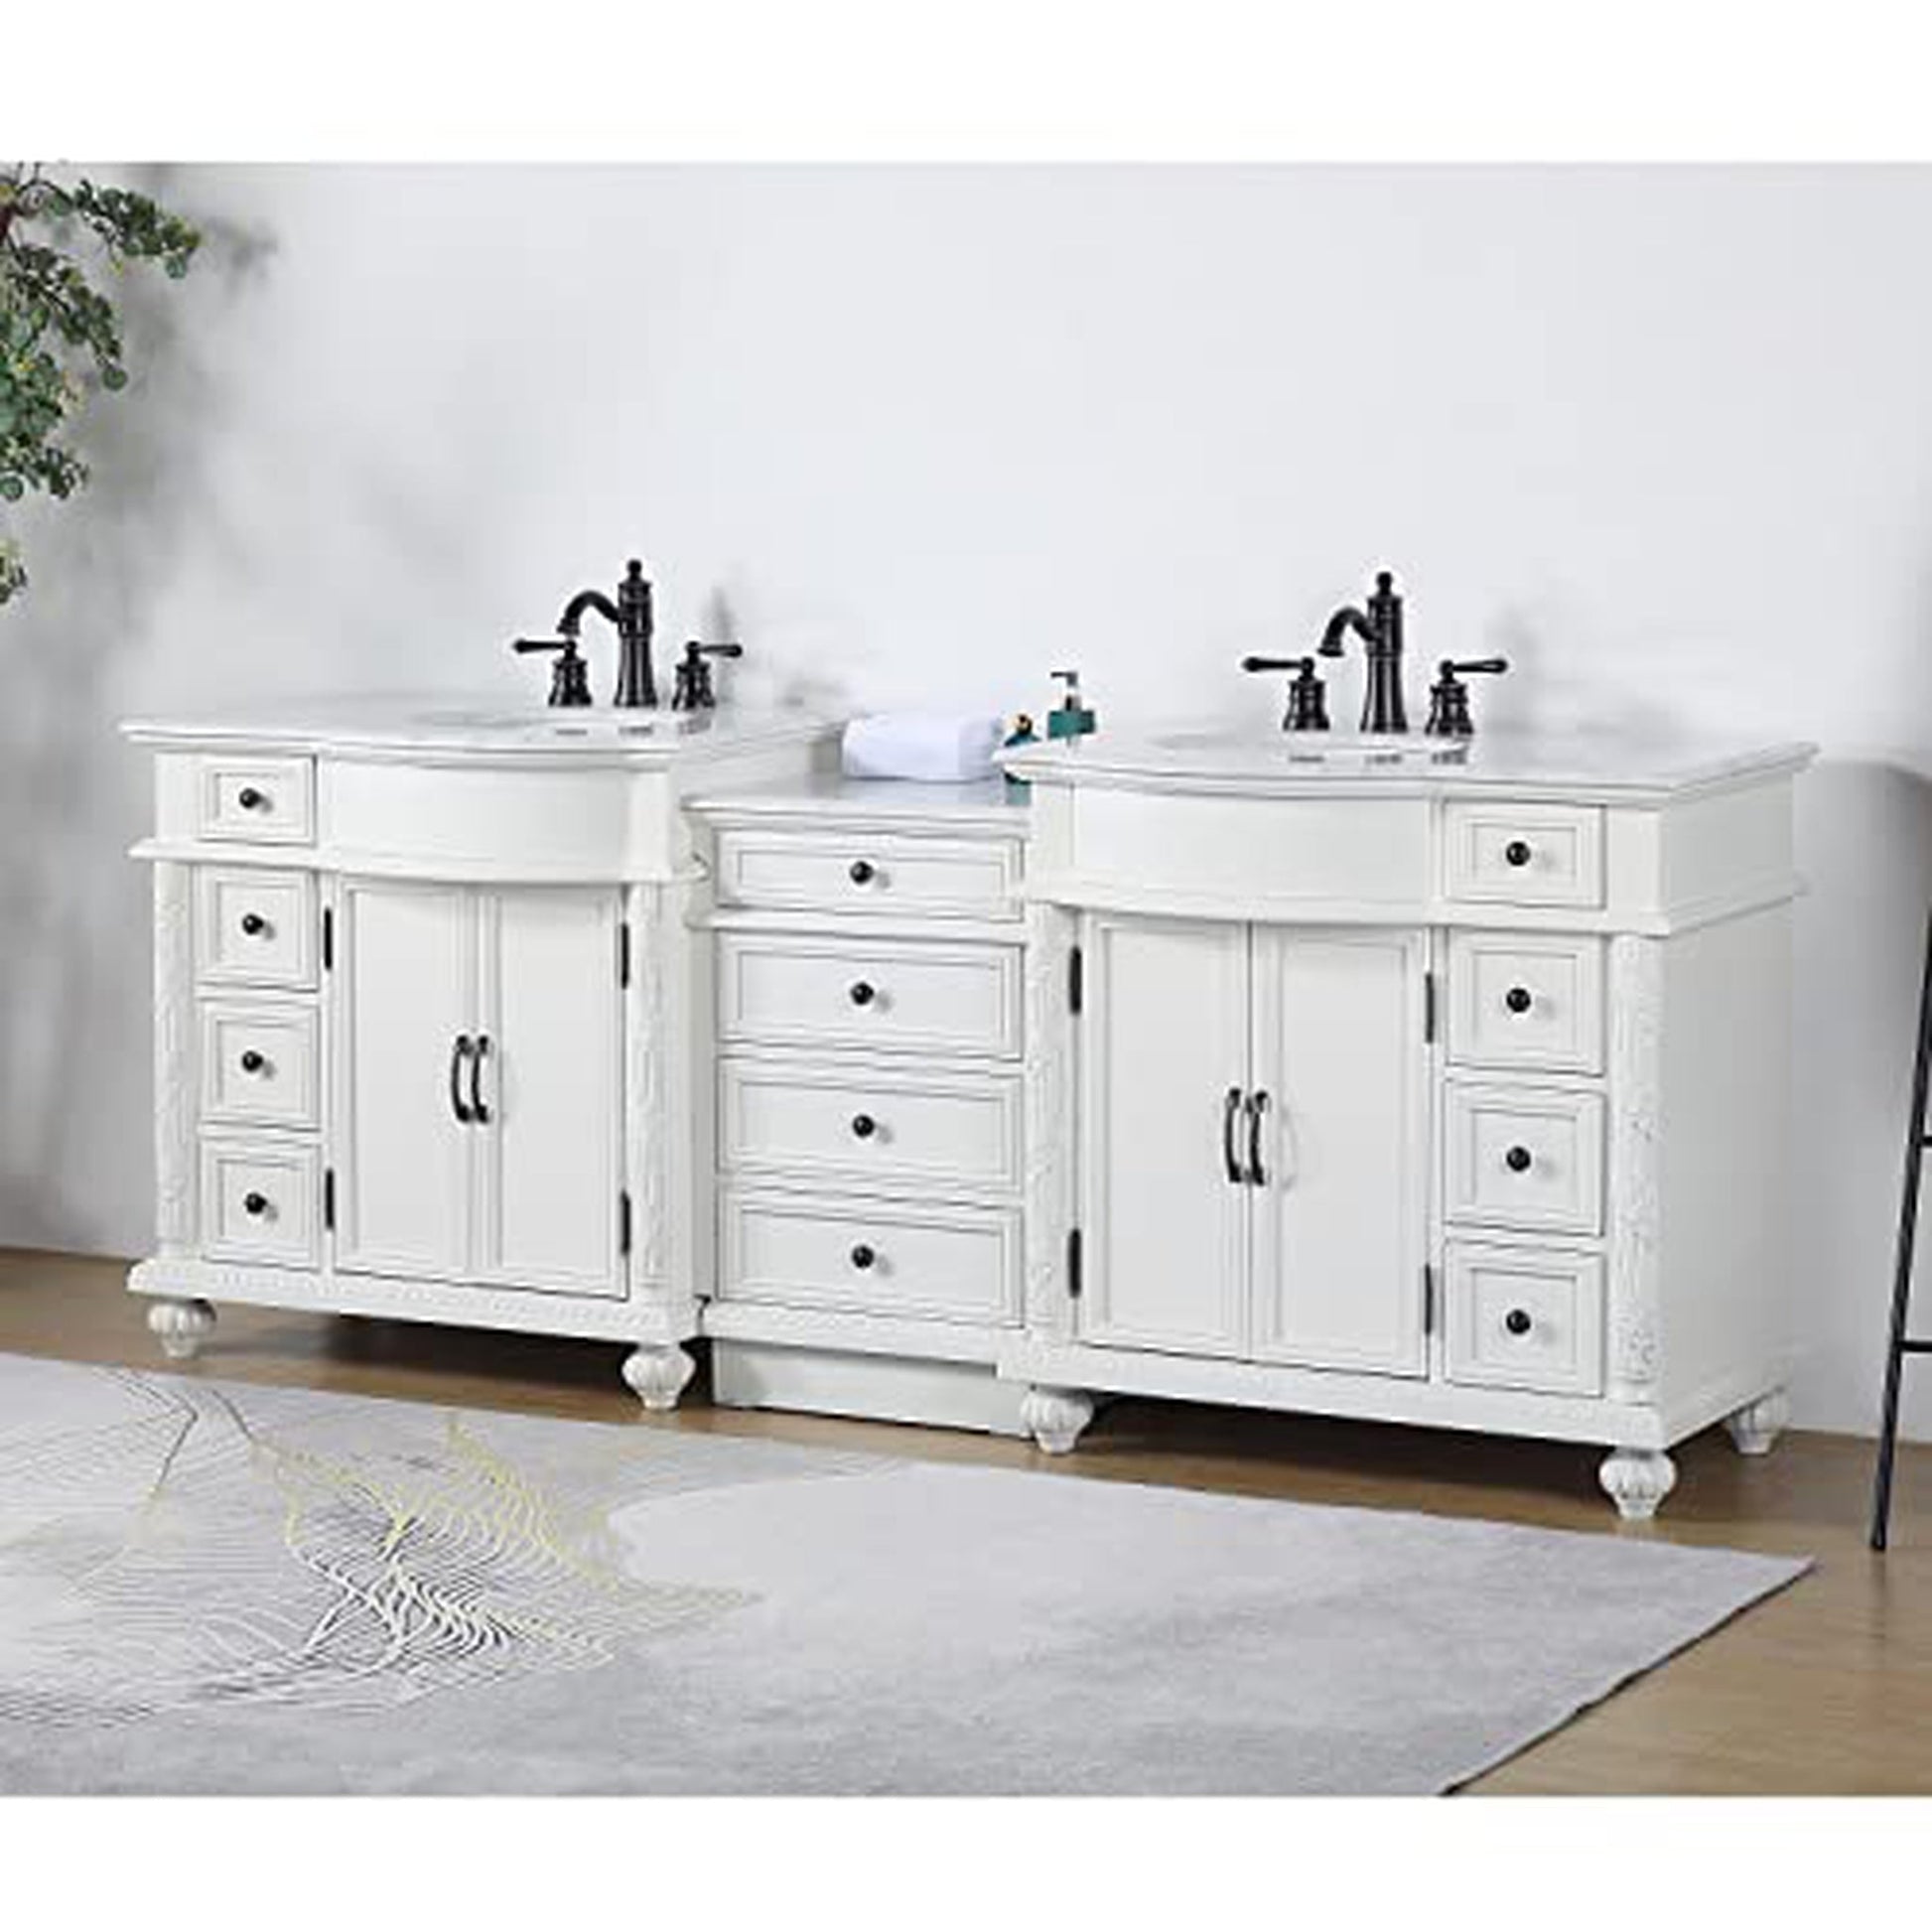 Silkroad Exclusive 90" Double Sink Antique White Modular Bathroom Vanity With Carrara White Marble Countertop and White Ceramic Undermount Sink